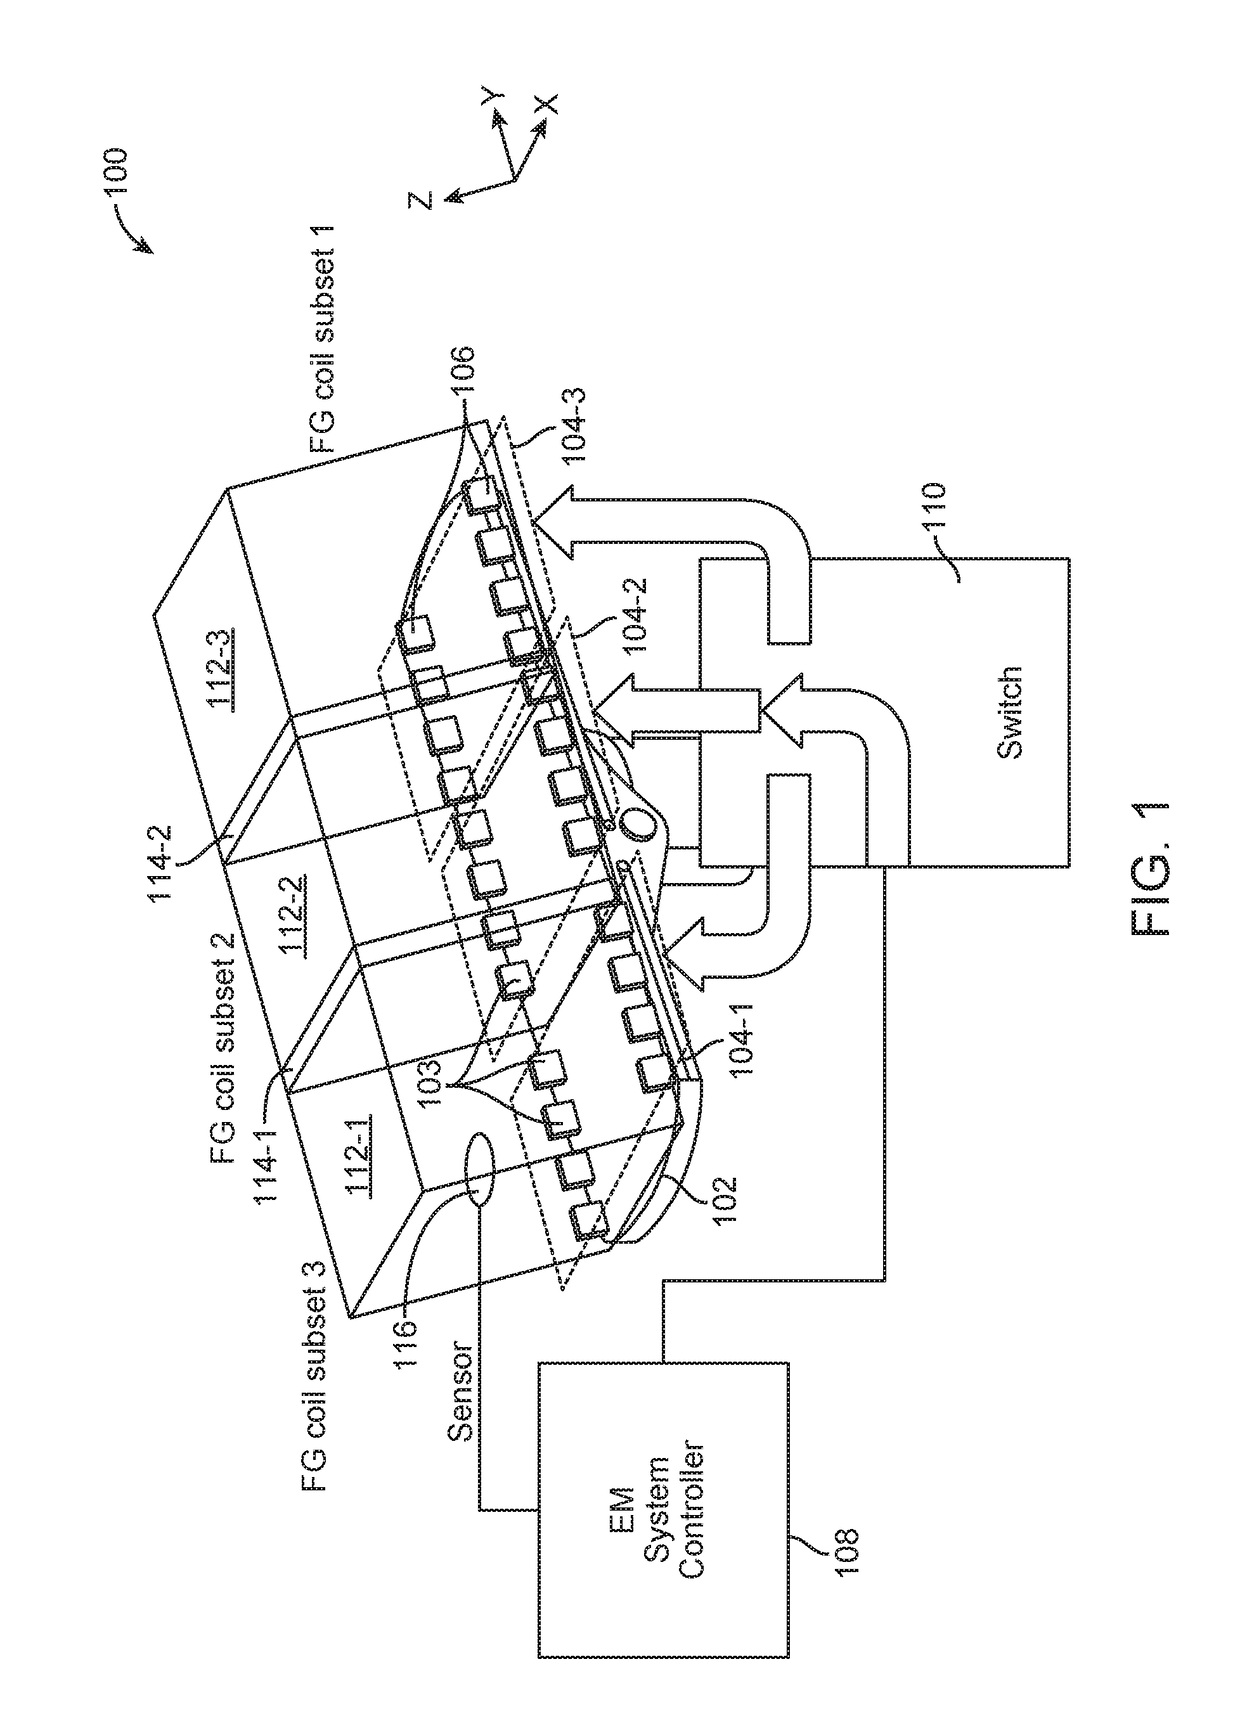 Electromagnetic tracking surgical system and method of controlling the same